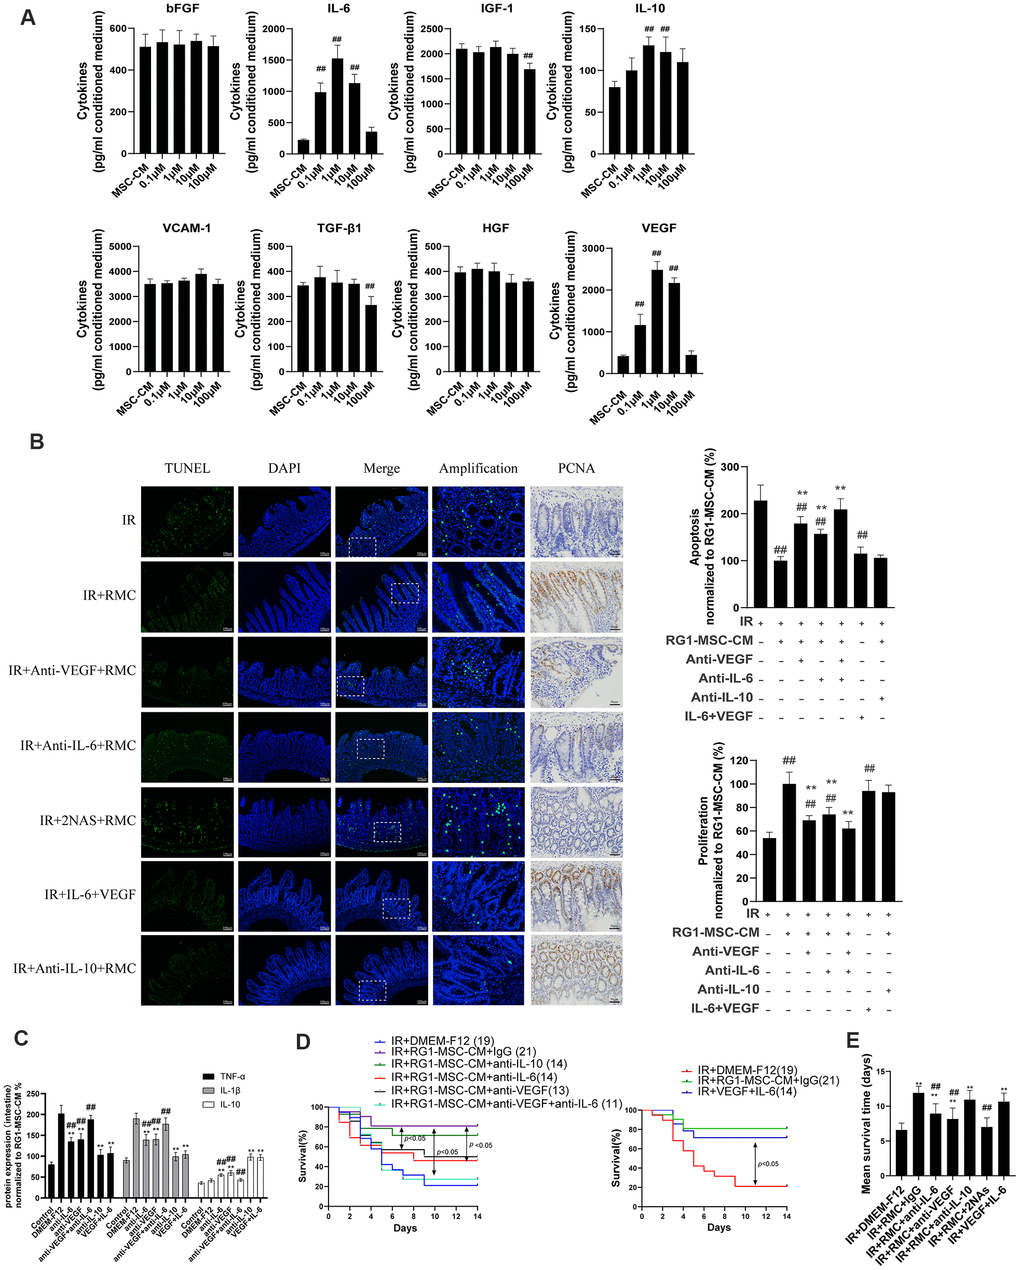 RG1-MSC-CM promotes RIII recovery via increased release of VEGF and IL-6. (A) 8 selected cytokines in unconcentrated conditioned medium derived from BM-MSCs pre-activated by different concentration of RG1 (0.1 μM, 1 μM, 10 μM, 100 μM) were detected by ELISA. Data represent mean ± SD of at least three independent experiments. ##, P B) The effect of neutralization of 3 selected cytokines or addition of selected exogenous cytokines on apoptosis (left panel) and proliferation (right panel) of intestine in irradiated rats. The apoptosis and proliferation were evaluated by quantification of TUNEL-positive and PCNA-positive cell per 5 crypts 3 days after radiation, respectively. Data is reported as mean ± SD (n = 4~5). ##, P **, P C) Pro/anti-inflammatory cytokines were extracted from jejunal protein of irradiated rats on day 3. The level of cytokines was determined by enzyme-linked immunosorbent assay (ELISA). (3~4 rats/group). **, P ##, P D) The effect of neutralization (left panel) of selected cytokines or addition of selected exogenous (right panel) cytokines on the survival of irradiated rats. Cumulative survival analyzed using the Kaplan-Meier method. P-values were determined by log-rank testing. The number of rats in each group is present in the parenthesis. (E) Mean survival time. Data represent the mean ± SD. **, P ##, P 